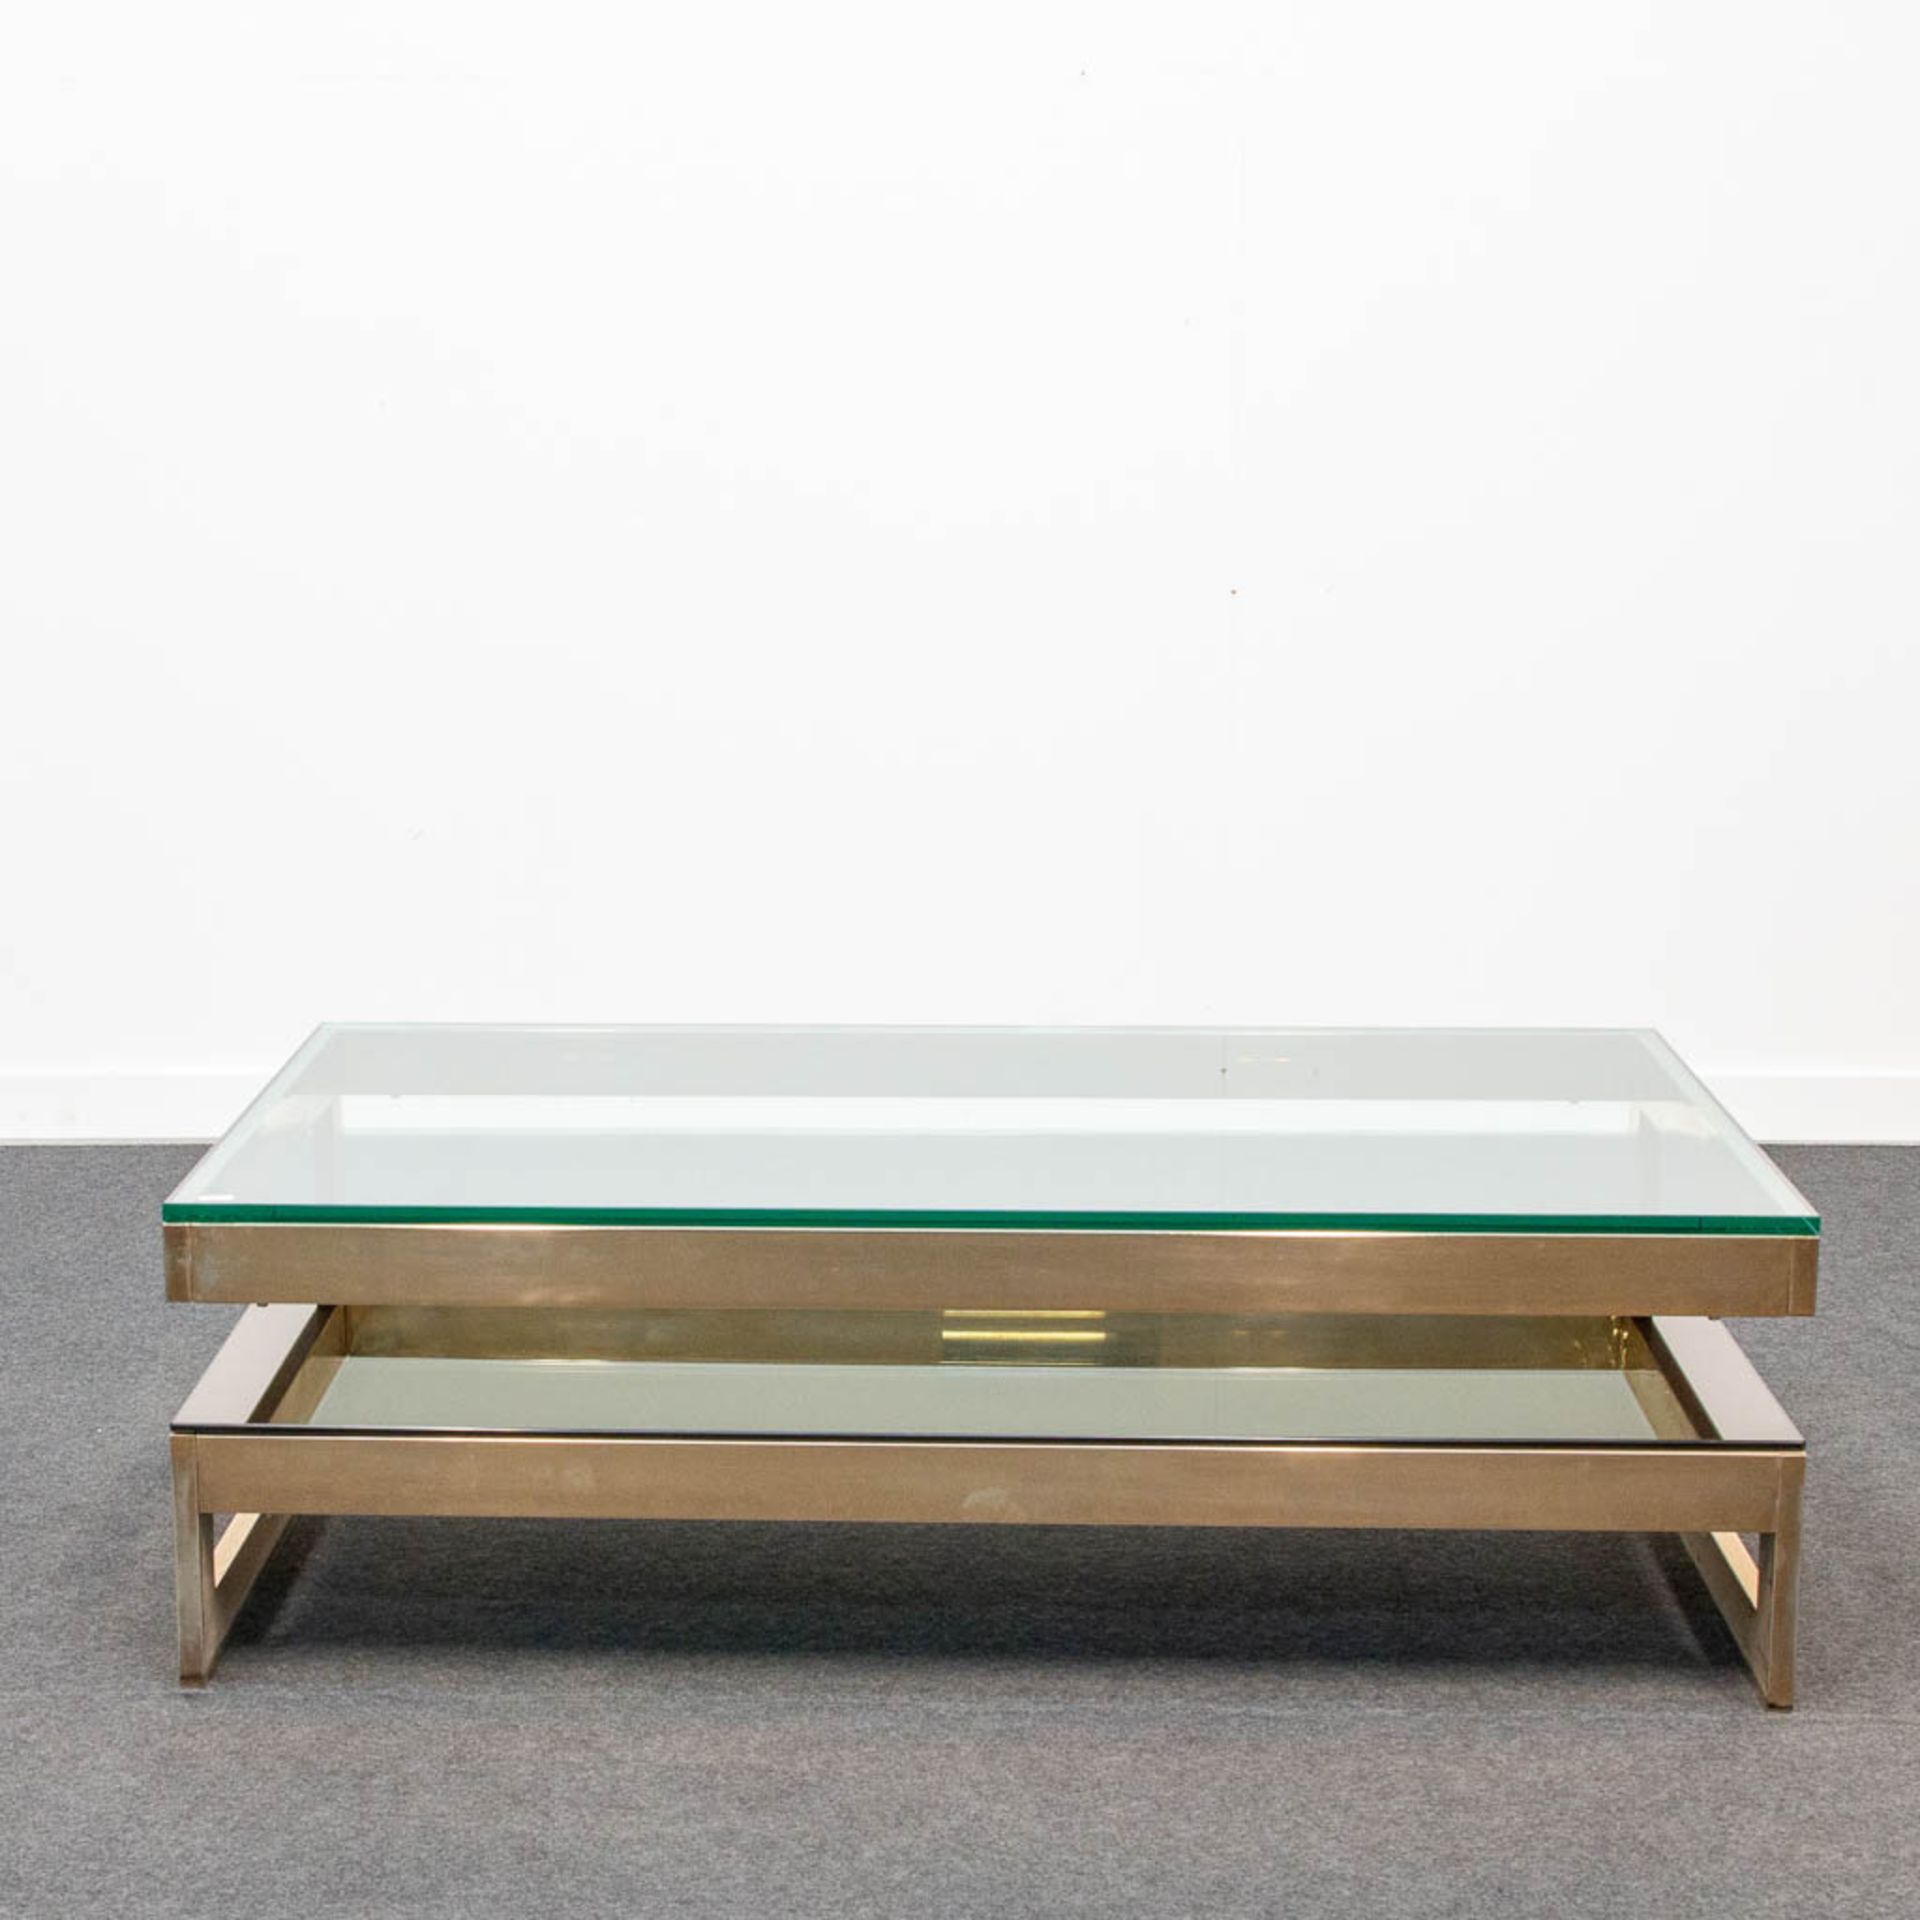 A Belgo-Chrom G-Shape coffee Table with fumé glass and clear glass. 20th century. - Image 2 of 19